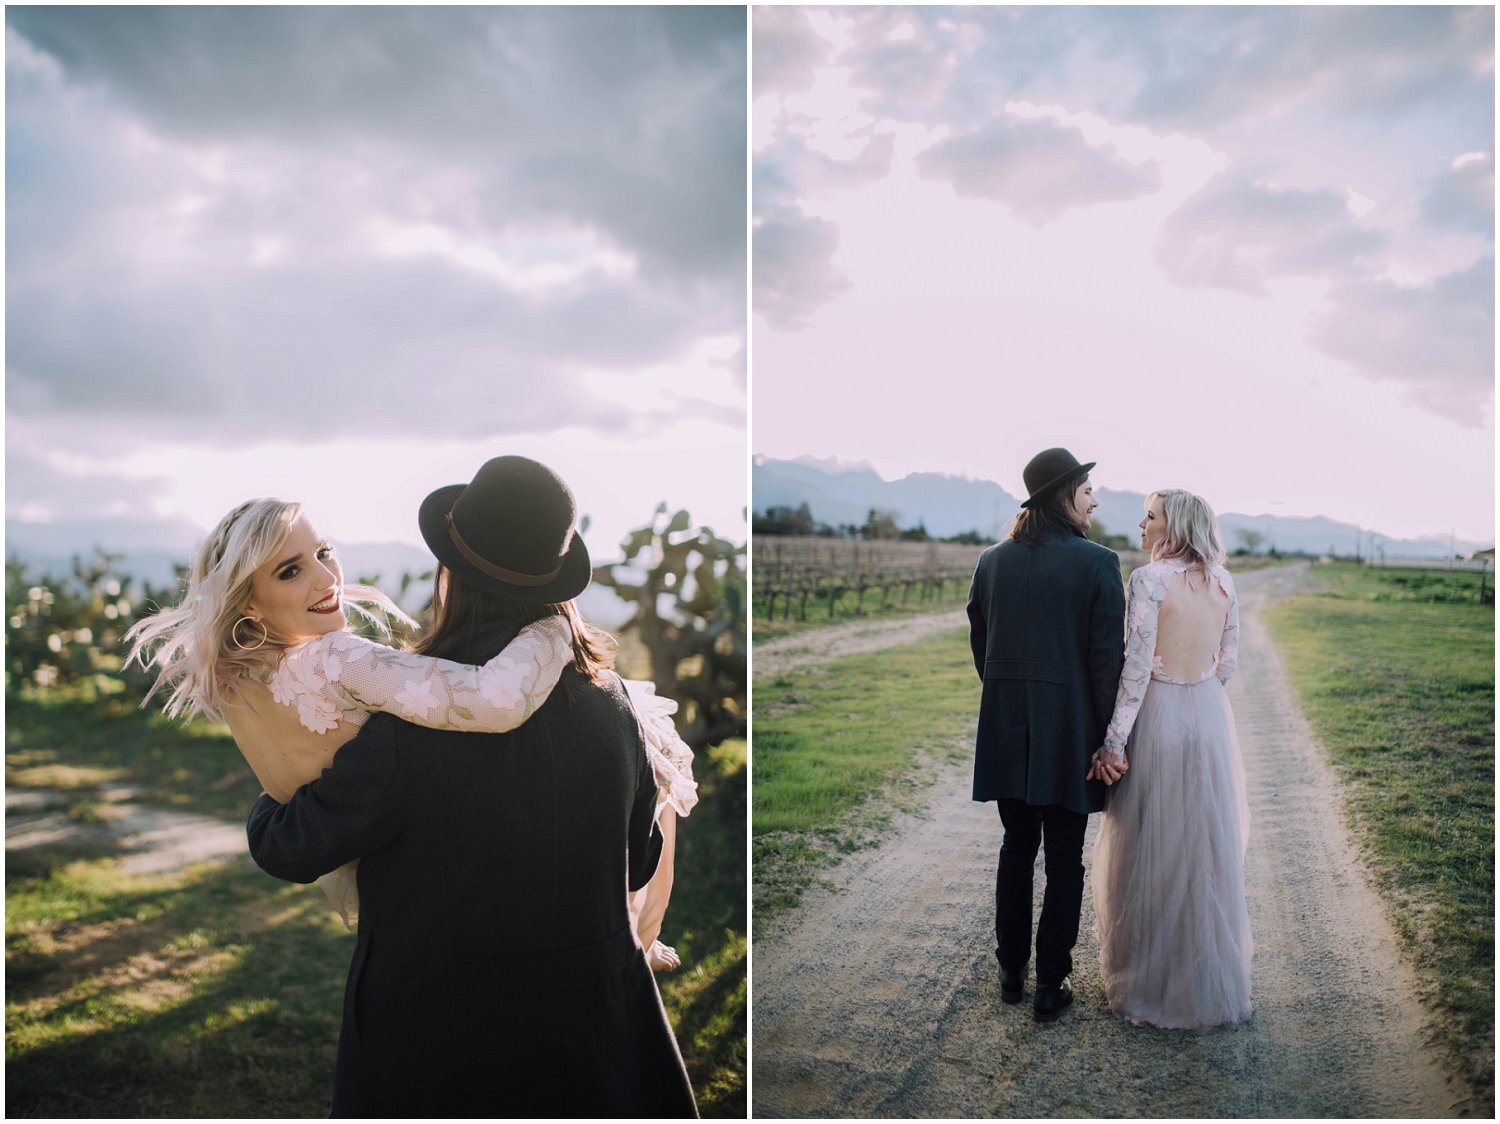 Top Wedding Photographer Cape Town South Africa Artistic Creative Documentary Wedding Photography Rue Kruger_1561.jpg